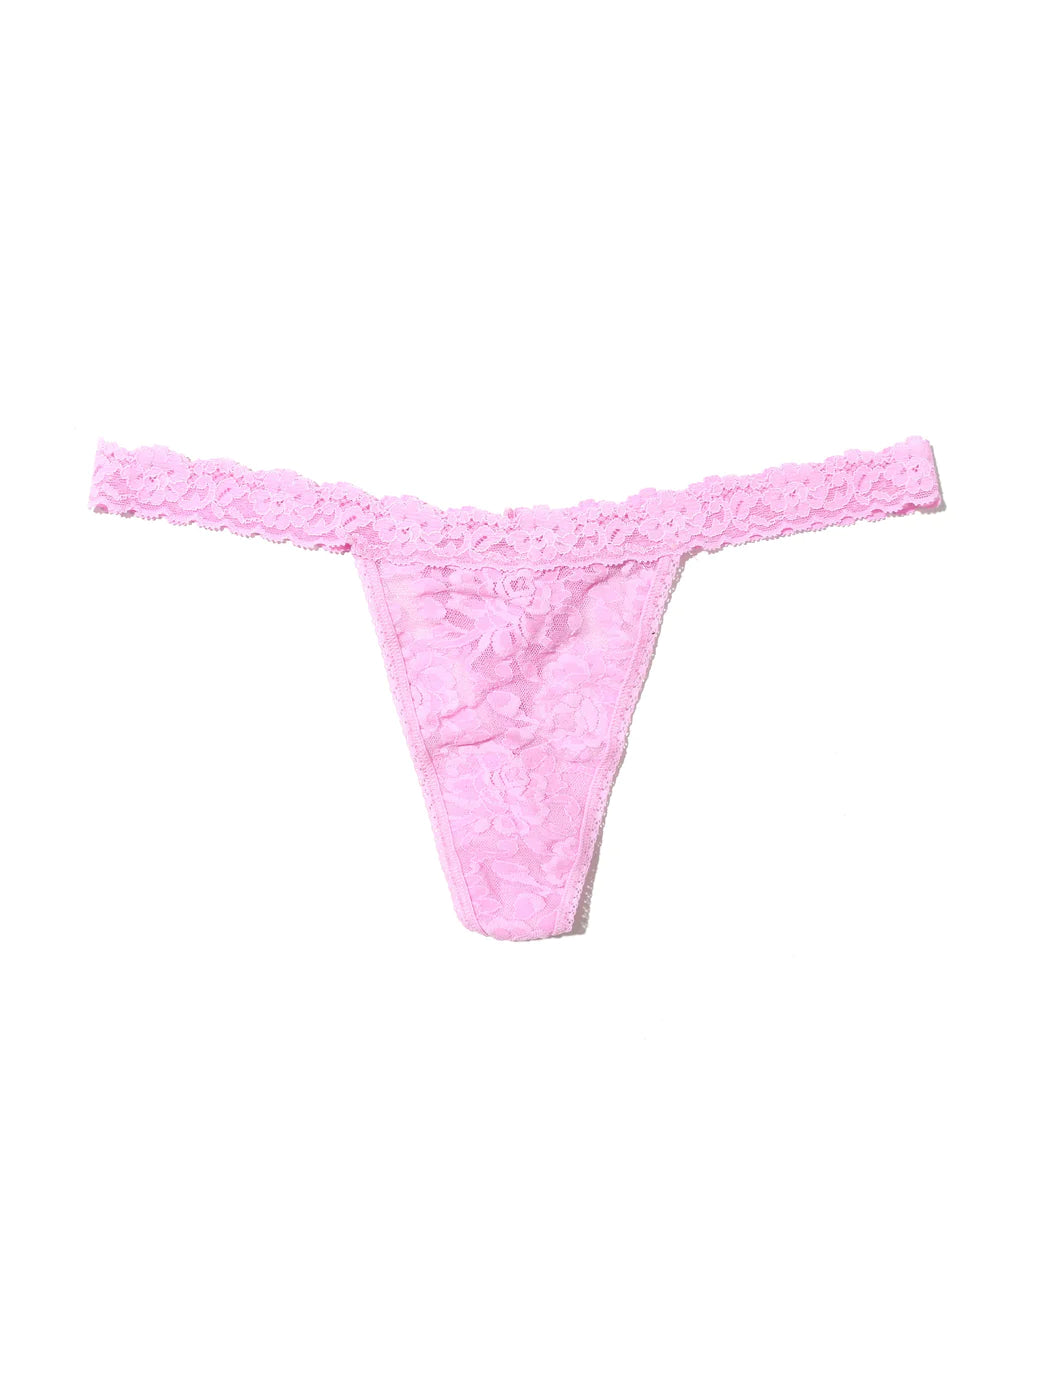 https://cdn.shopify.com/s/files/1/1068/1704/files/Hanky-Panky-Signature-Lace-G-String-Cotton-Candy-Pink-COTTON-CANDY-PINK-View-1.webp?v=1701733996